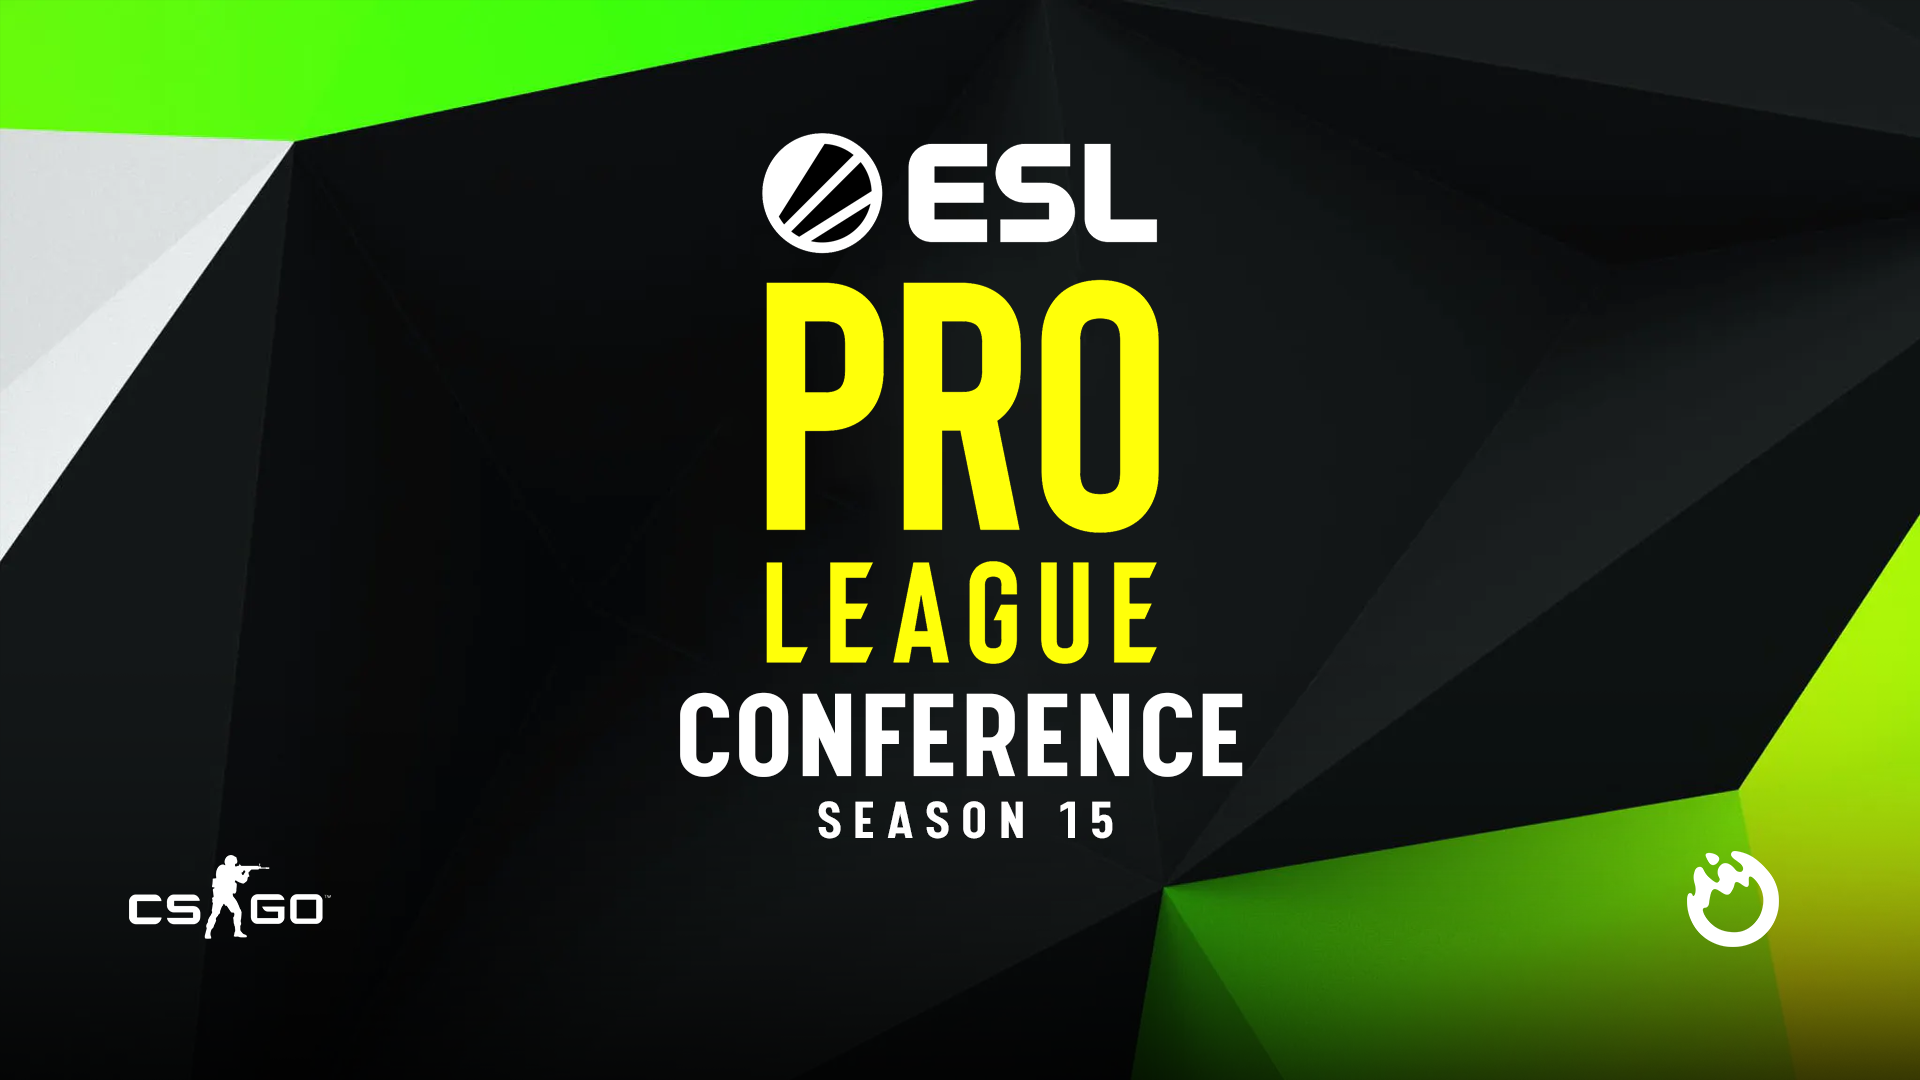 ESL Pro League S15 Conference: Renegades, ORDER out means LookingForOrg will solely represent OCE at Pro League